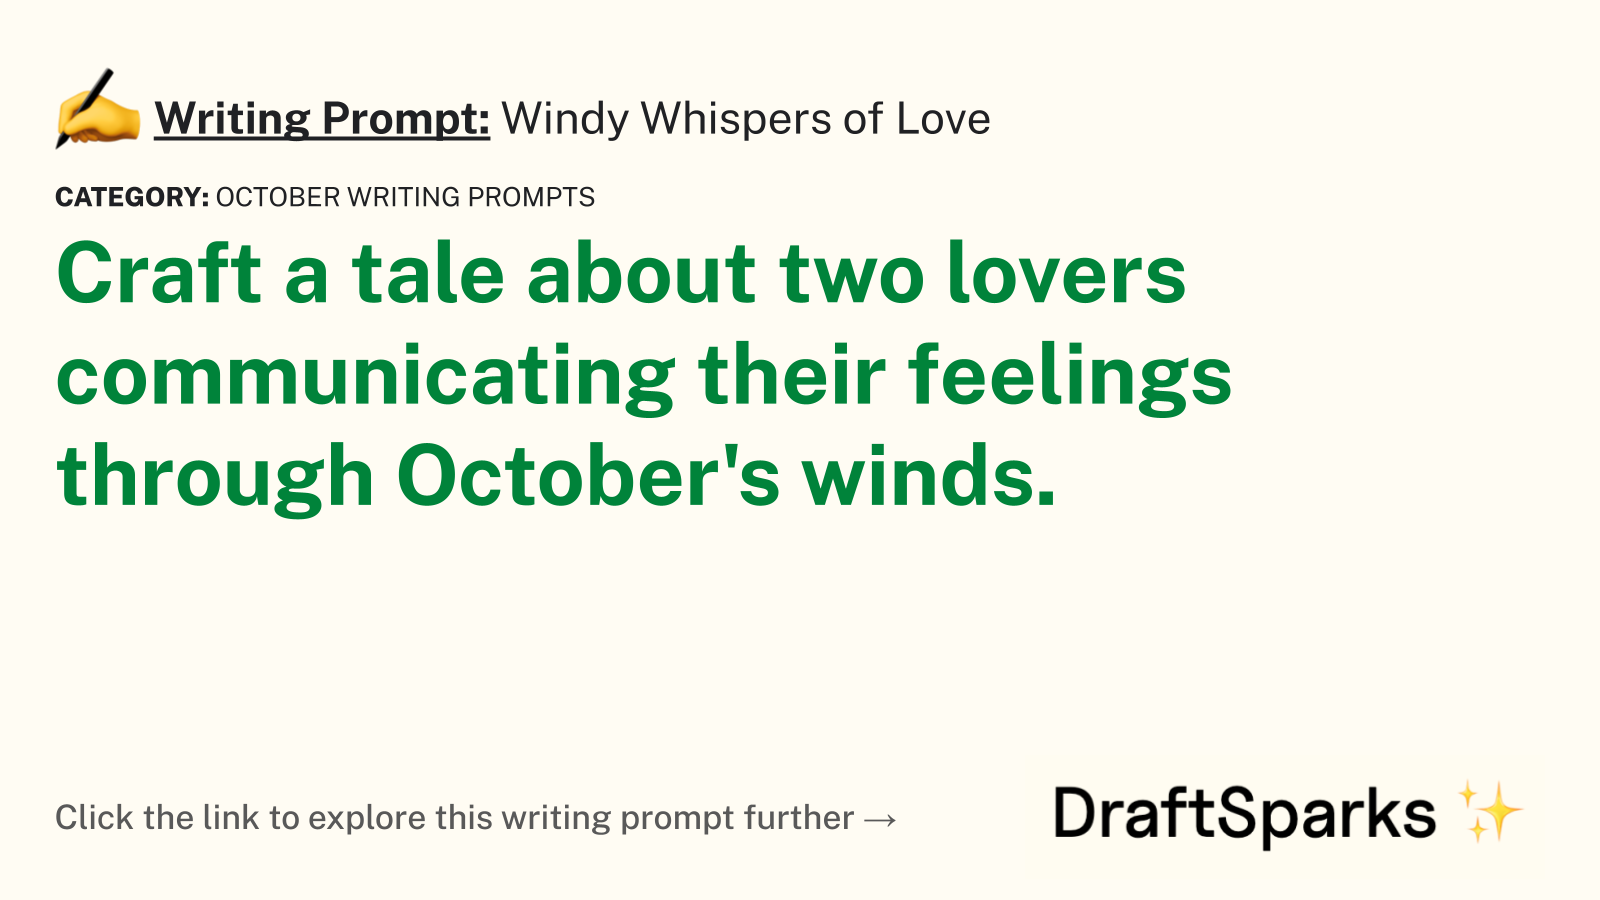 Windy Whispers of Love